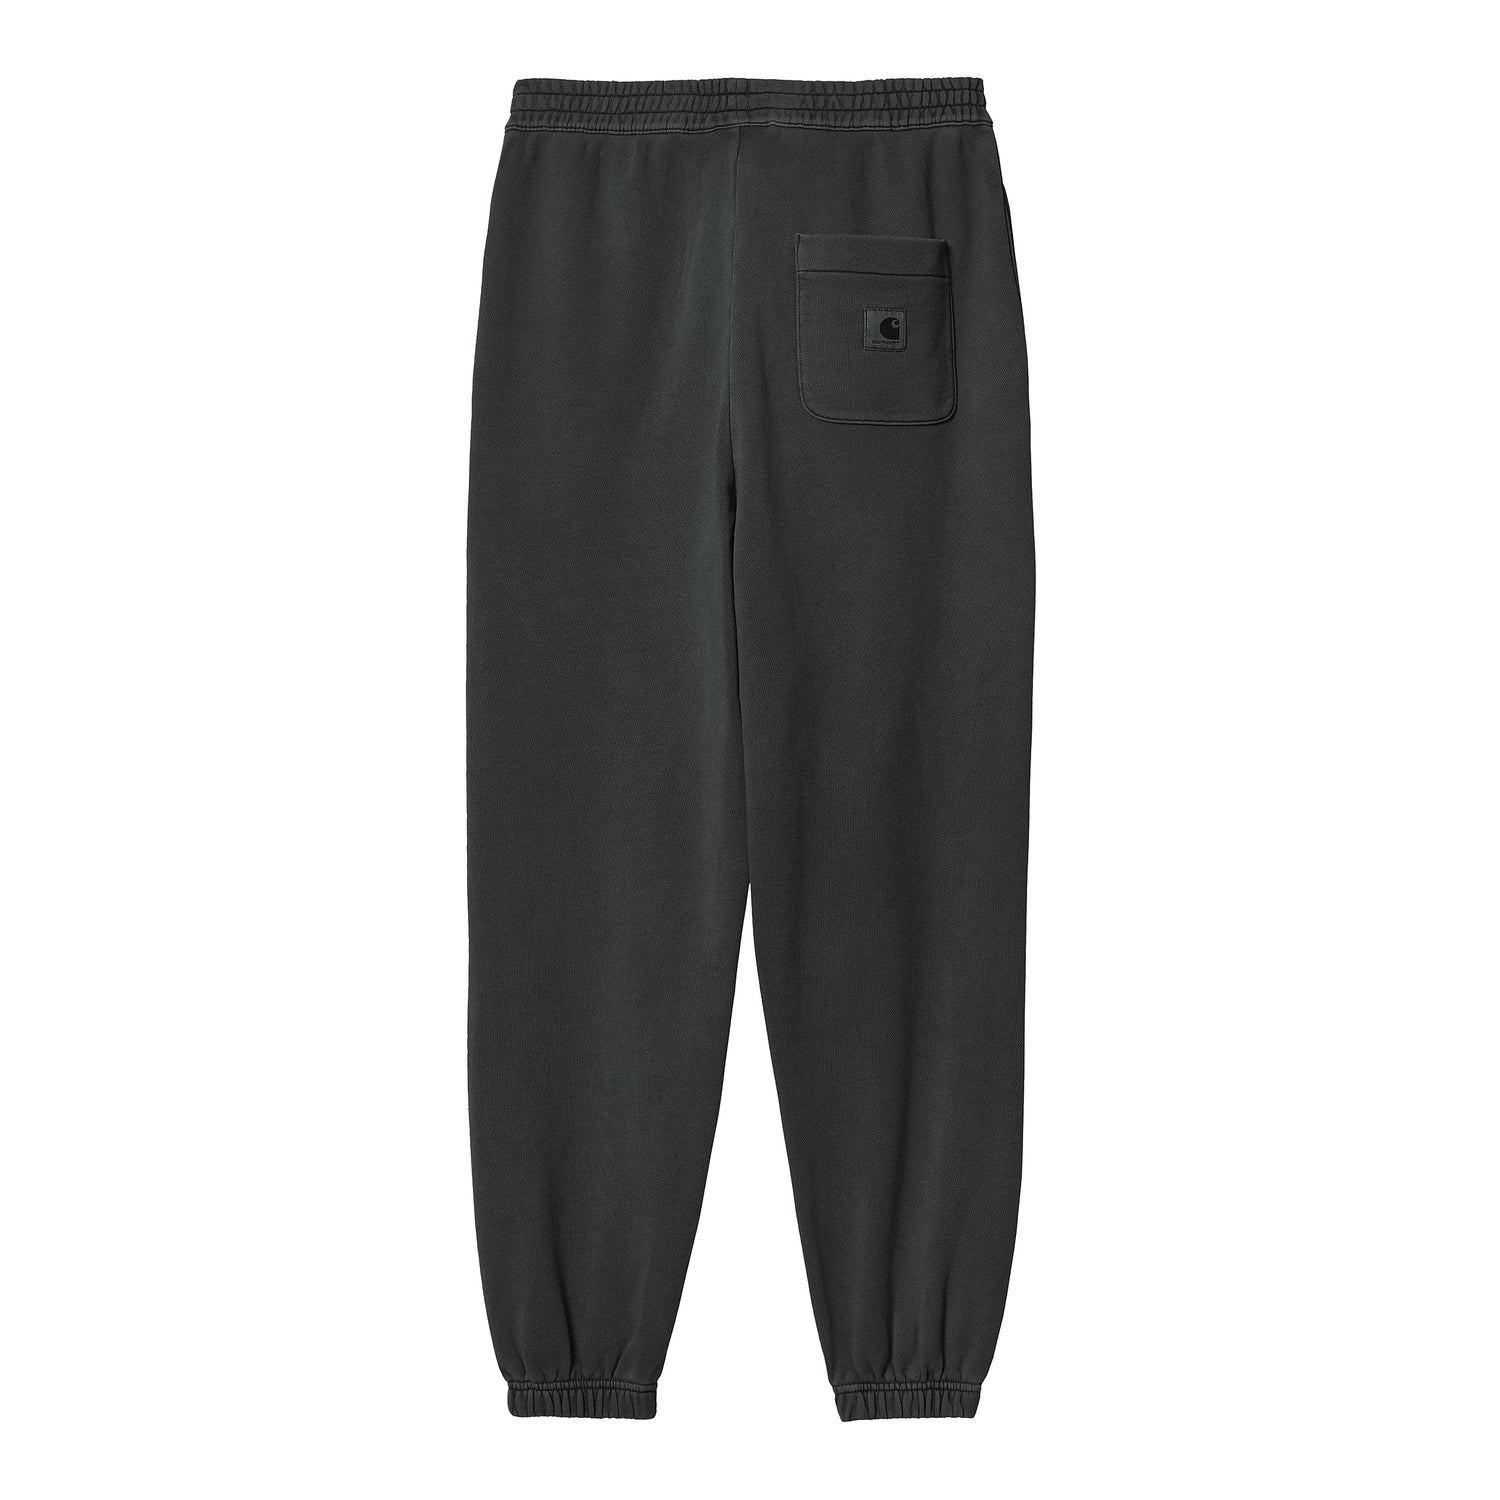 W' NELSON SWEAT PANT CHARCOAL GARMENT DYED